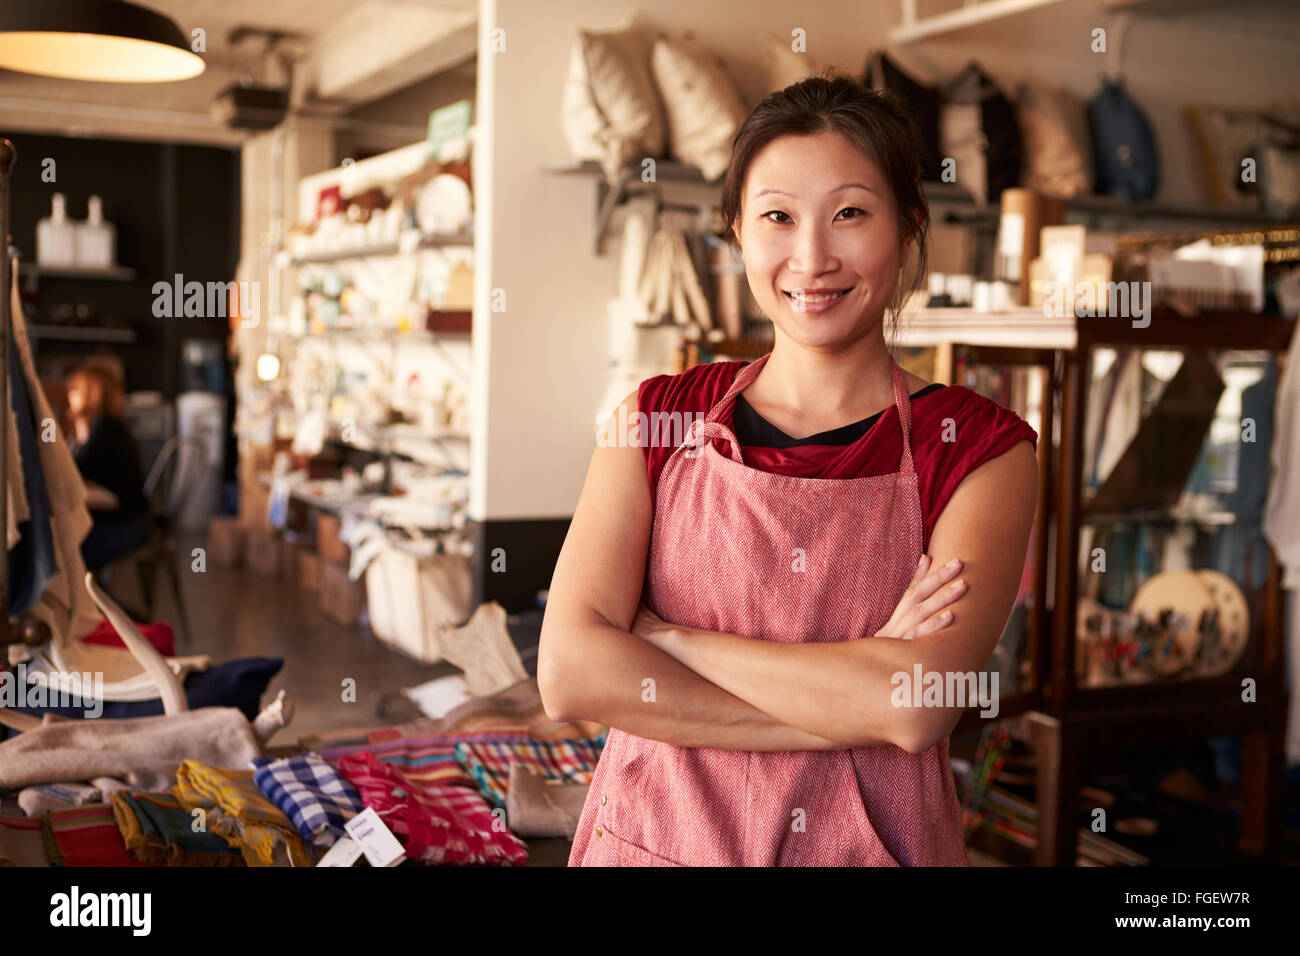 Portrait Of Female Owner Standing In Gift Store Stock Photo